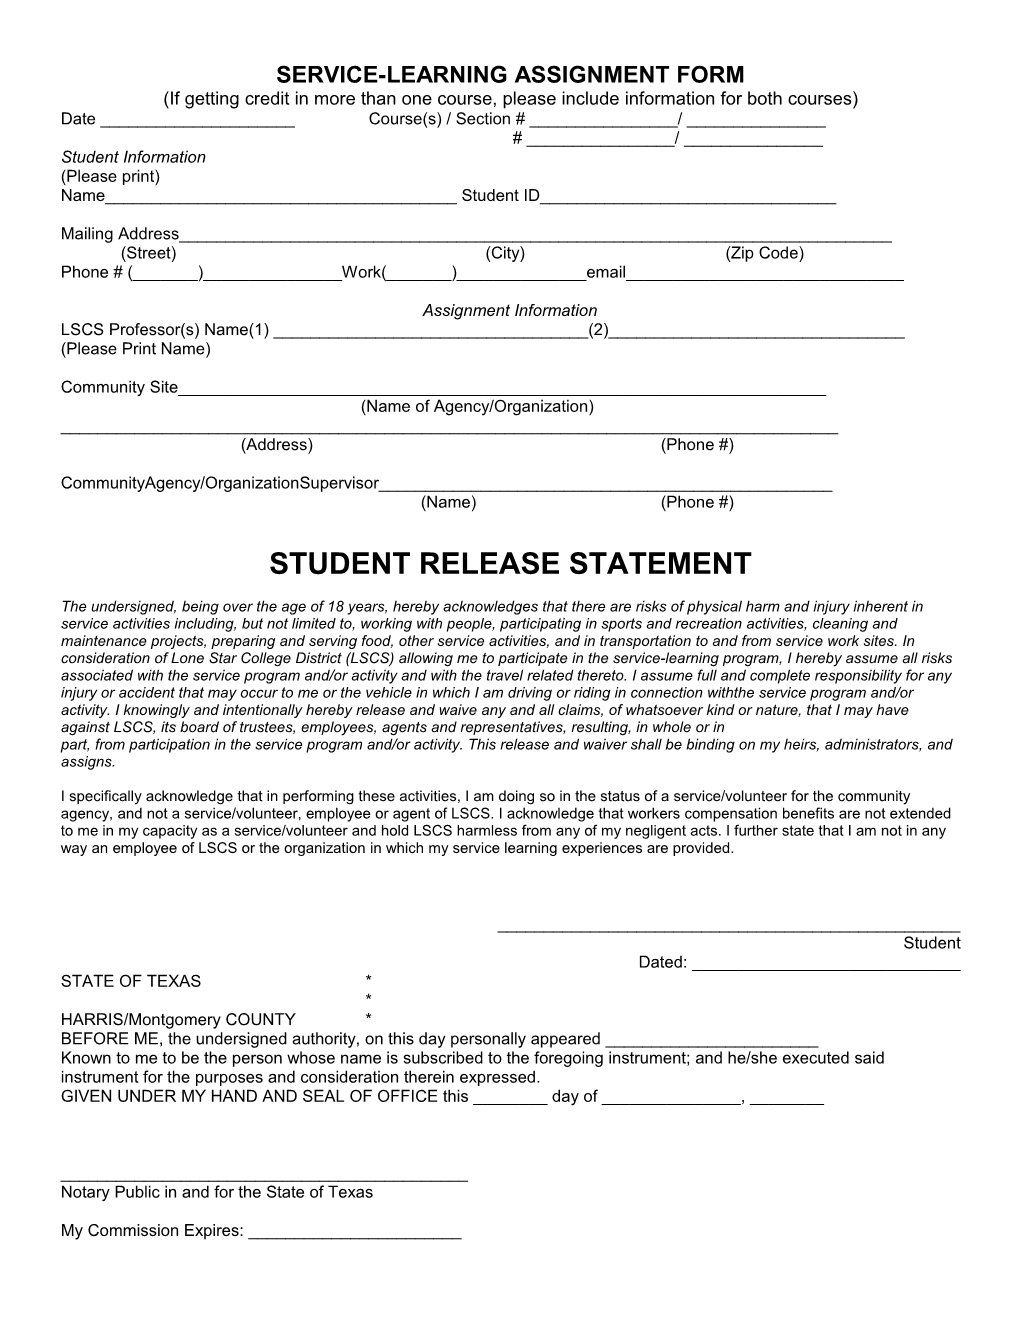 Service-Learning Assignment Form